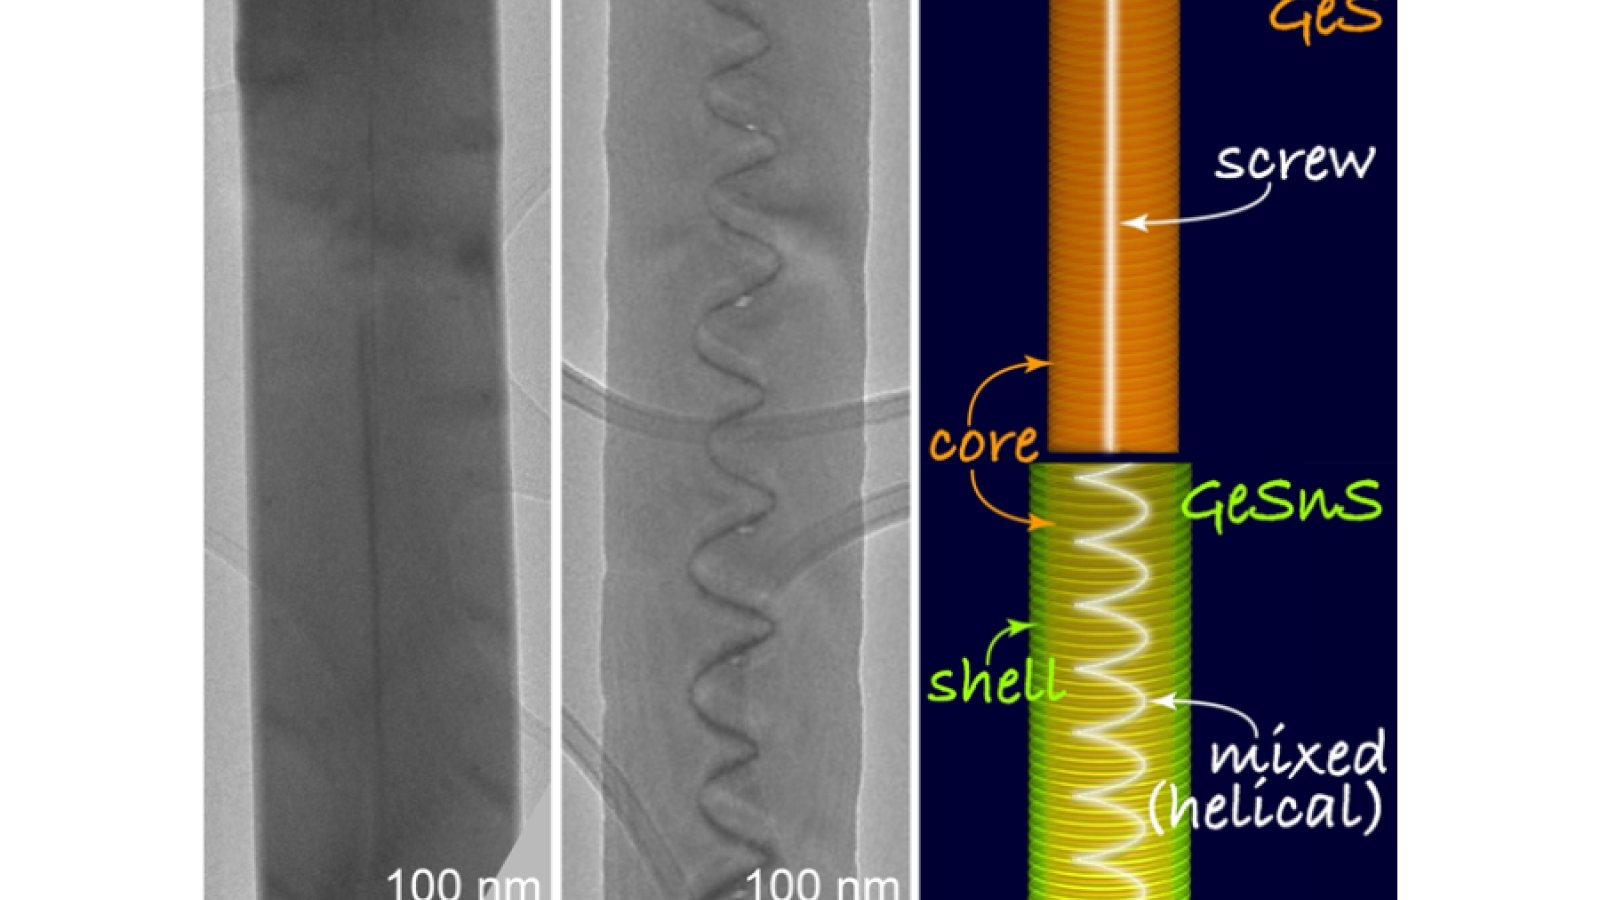 Electron microscopy images show a germanium sulfide nanowire (left) containing a single screw dislocation, the screw dislocation converted into a mixed helical dislocation in a hybrid nanowire (center) and an illustration of controlled formation of a tunable mixed dislocation in a core-shell nanowire heterostructure. 